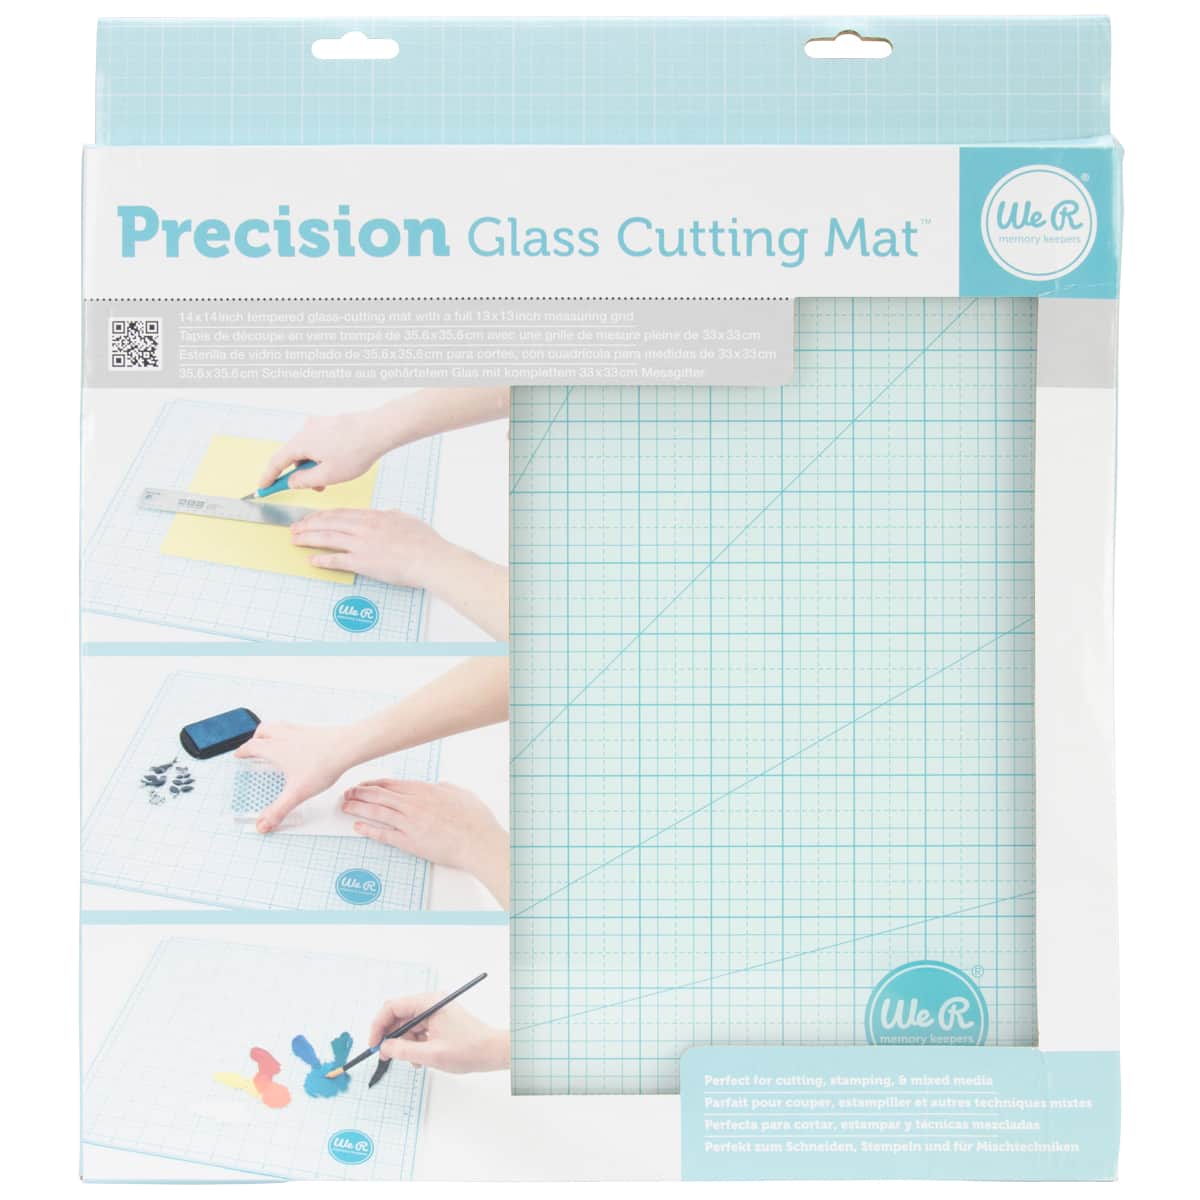 Your Guide to Cutting Mats, Glass Mats, and Other Crafty Work Surfaces